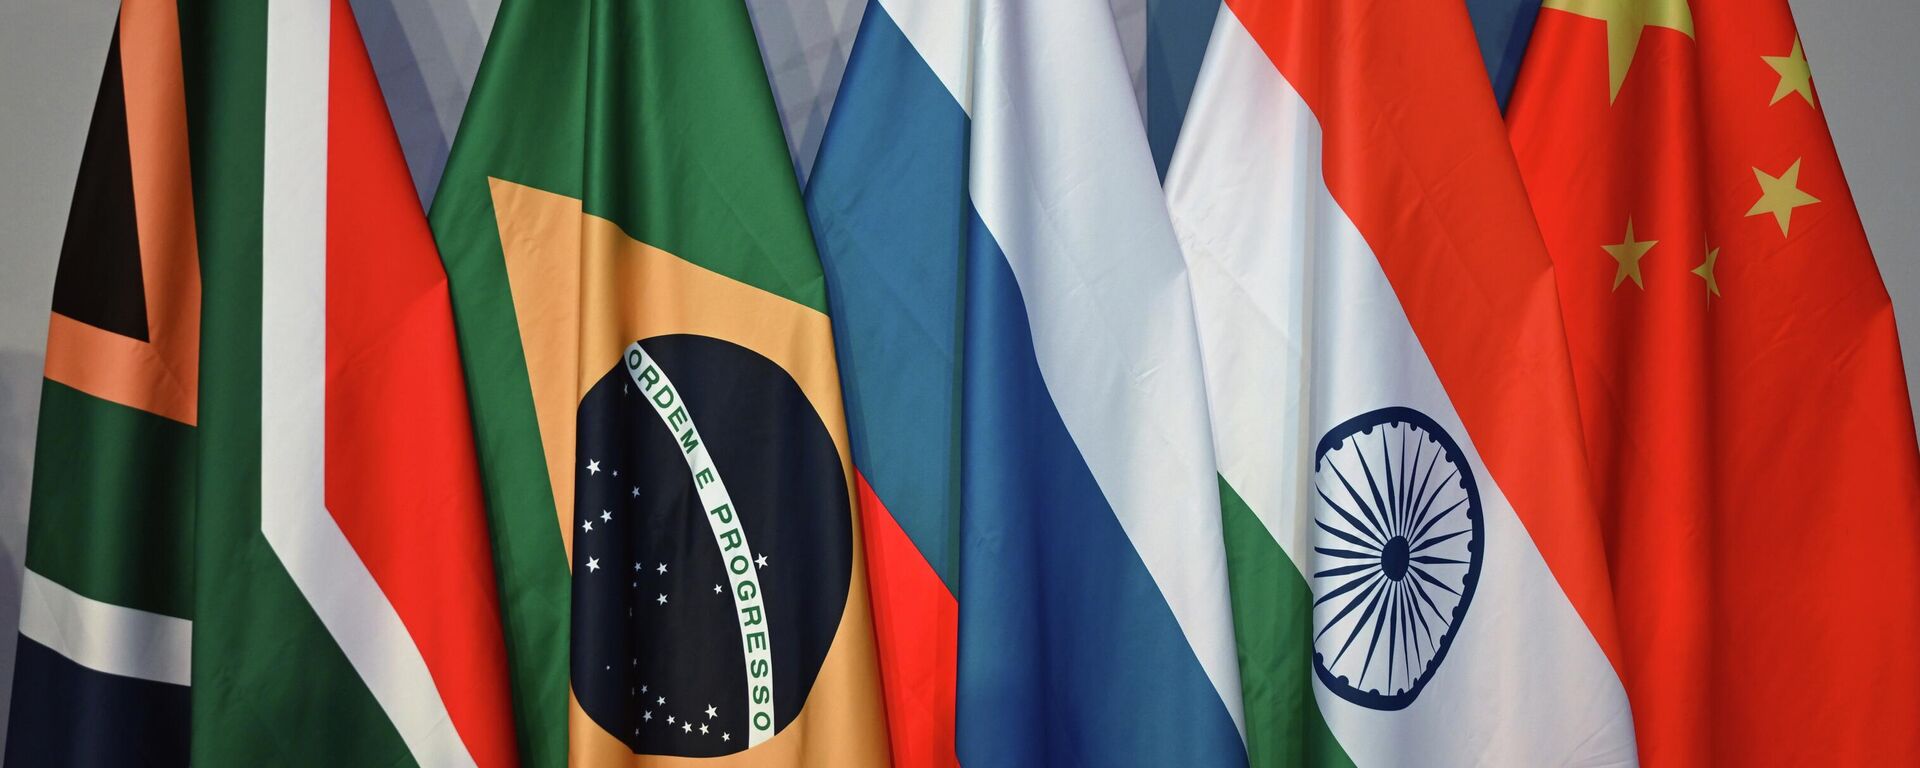 Flags of the BRICS member countries are seen during the 15th BRICS Summit in Johannesburg, South Africa, on Tuesday, August 22, 2023. - Sputnik Afrique, 1920, 22.08.2023